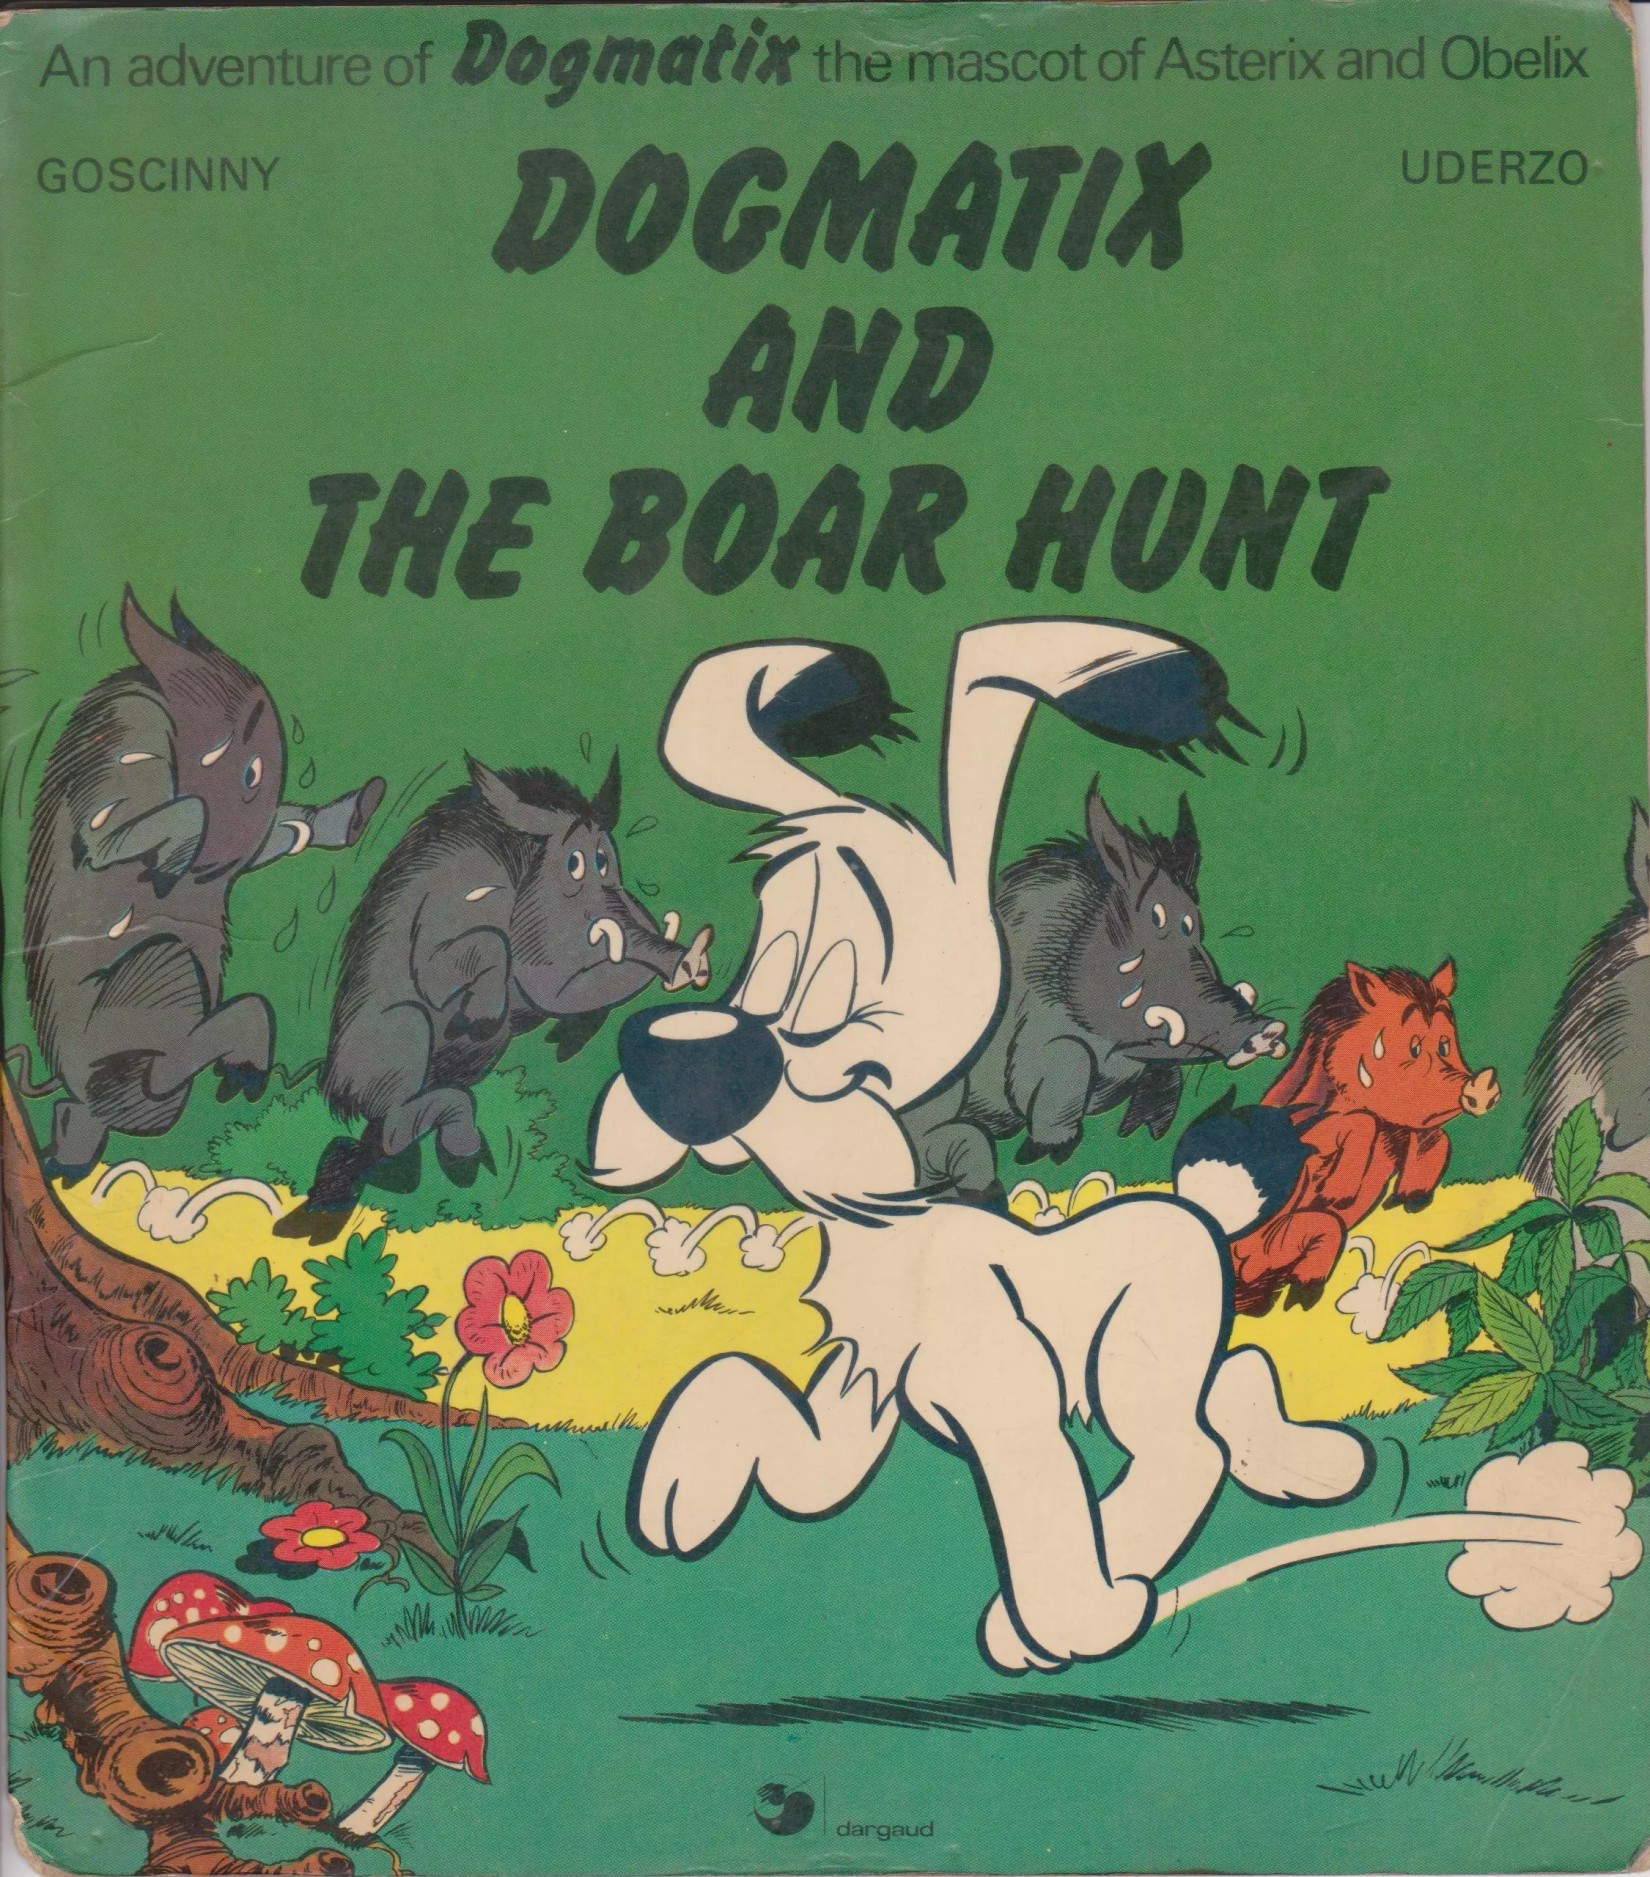 Dogmatix and the Boar Hunt